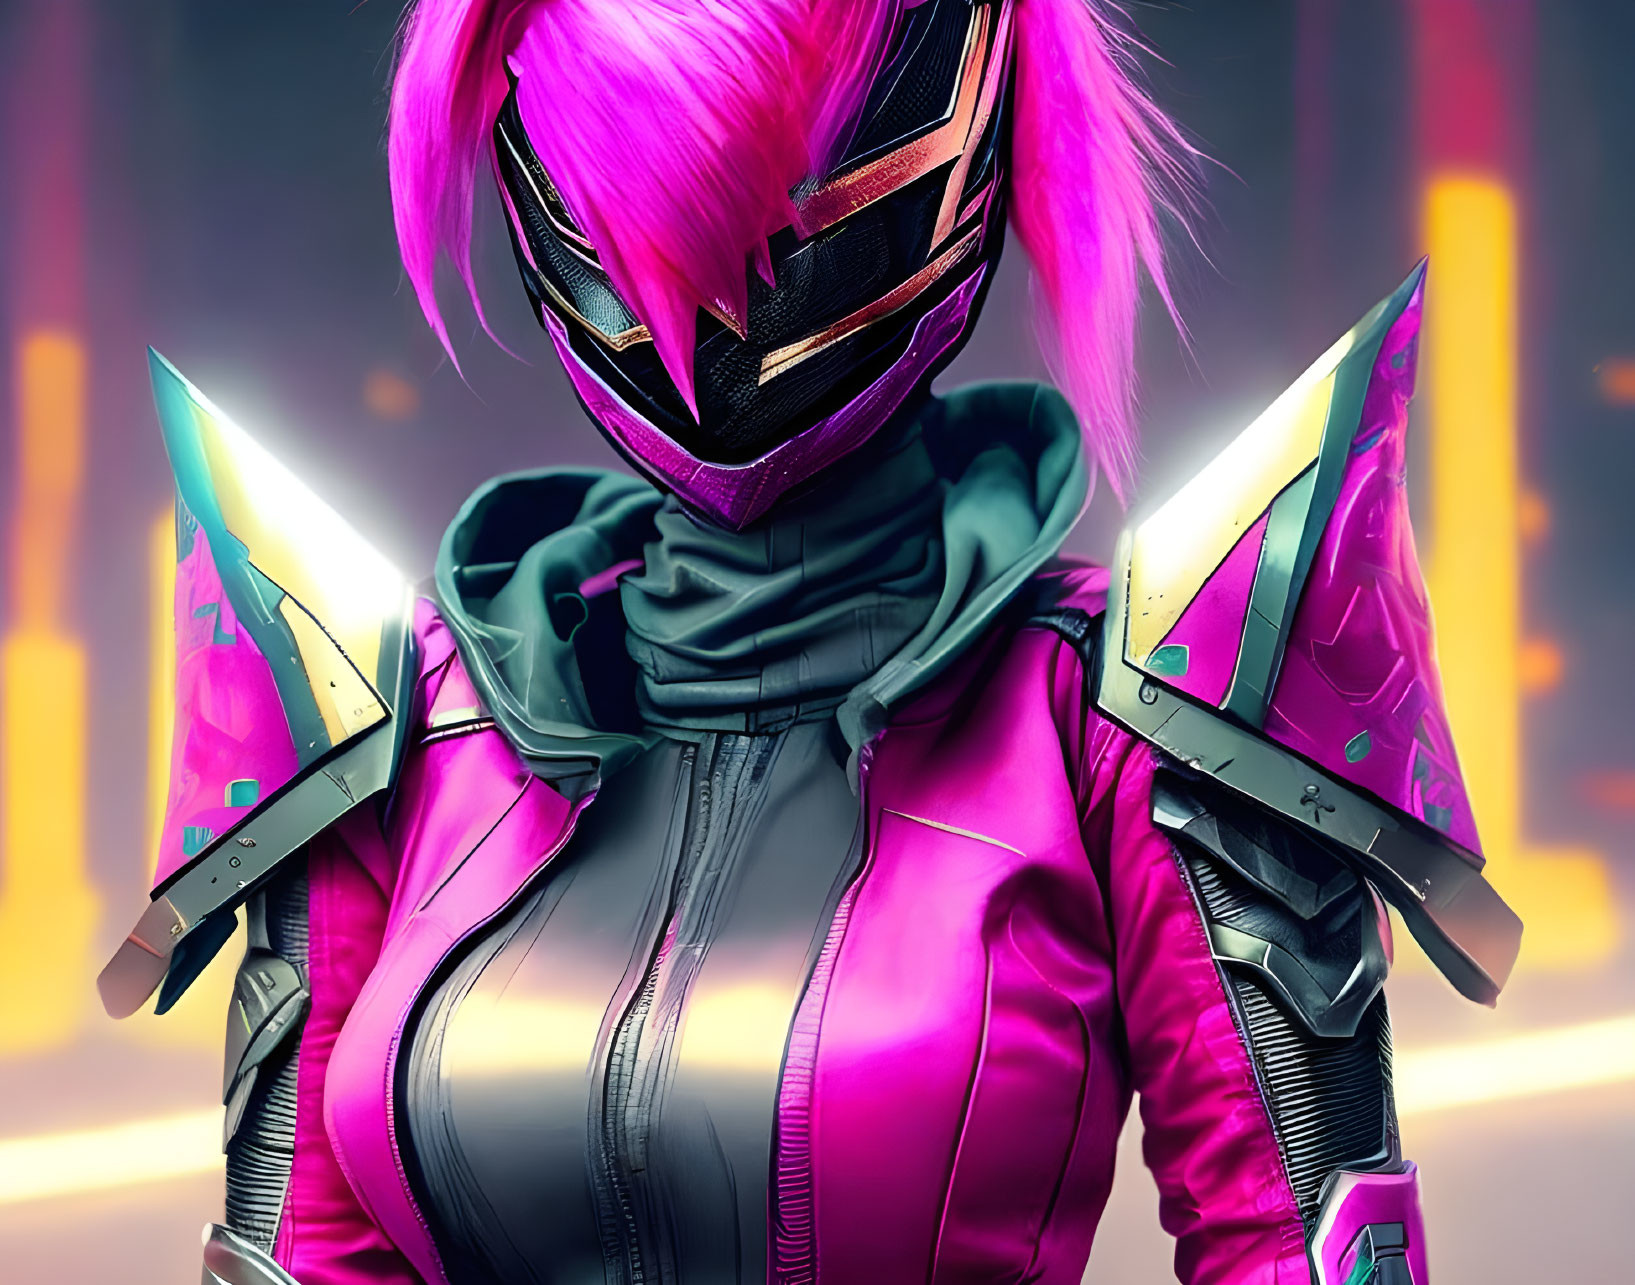 Person in Pink Helmet with Futuristic Knives in Neon-lit Setting